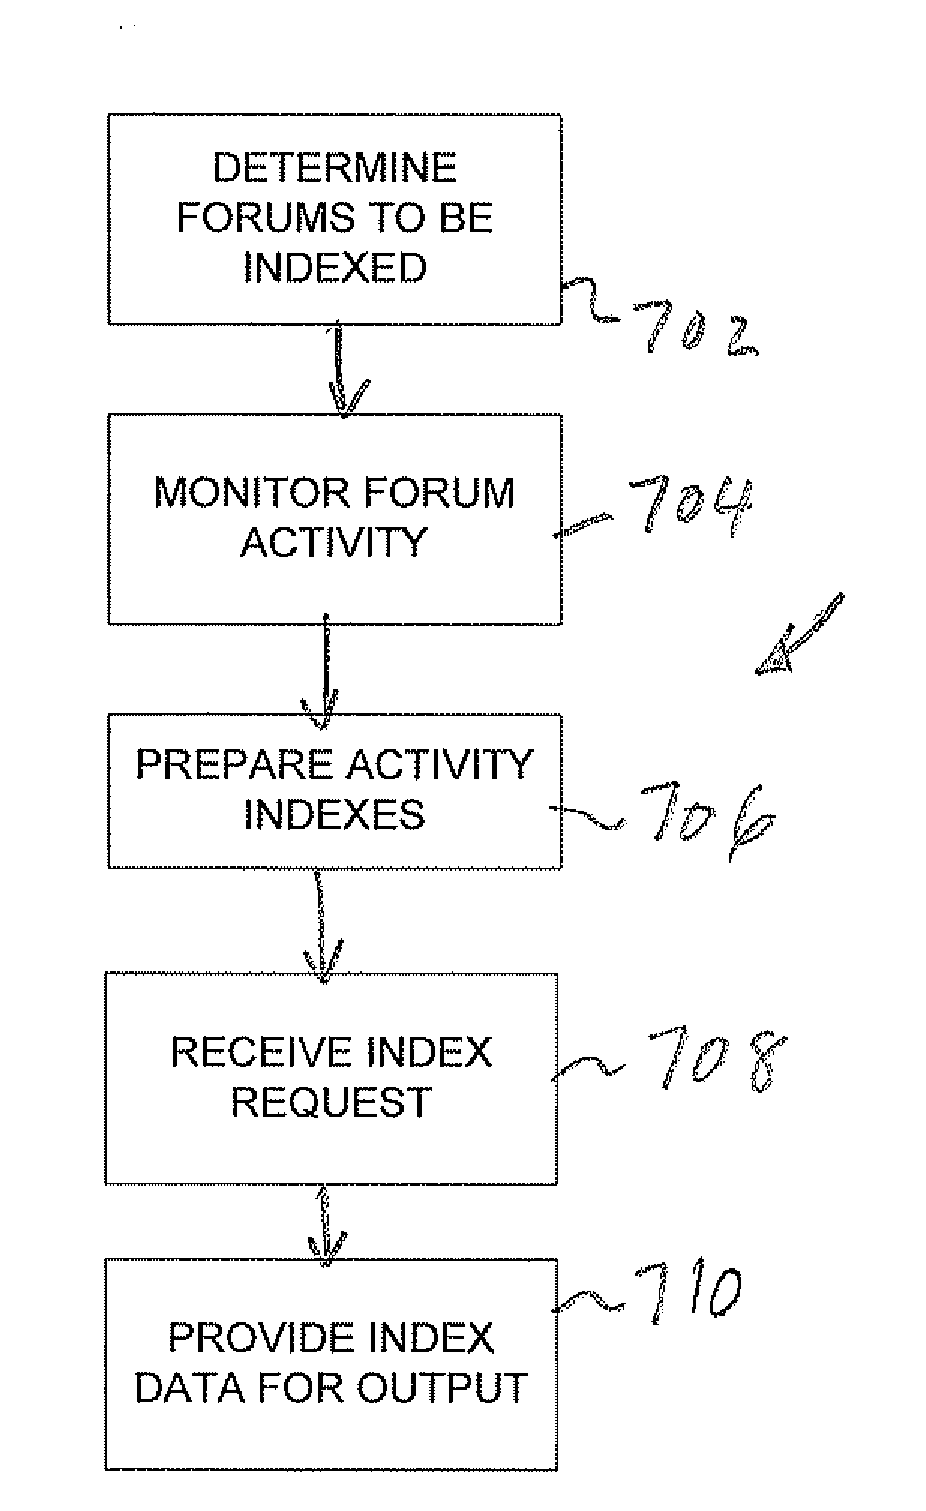 Forum search with time-dependent activity weighting